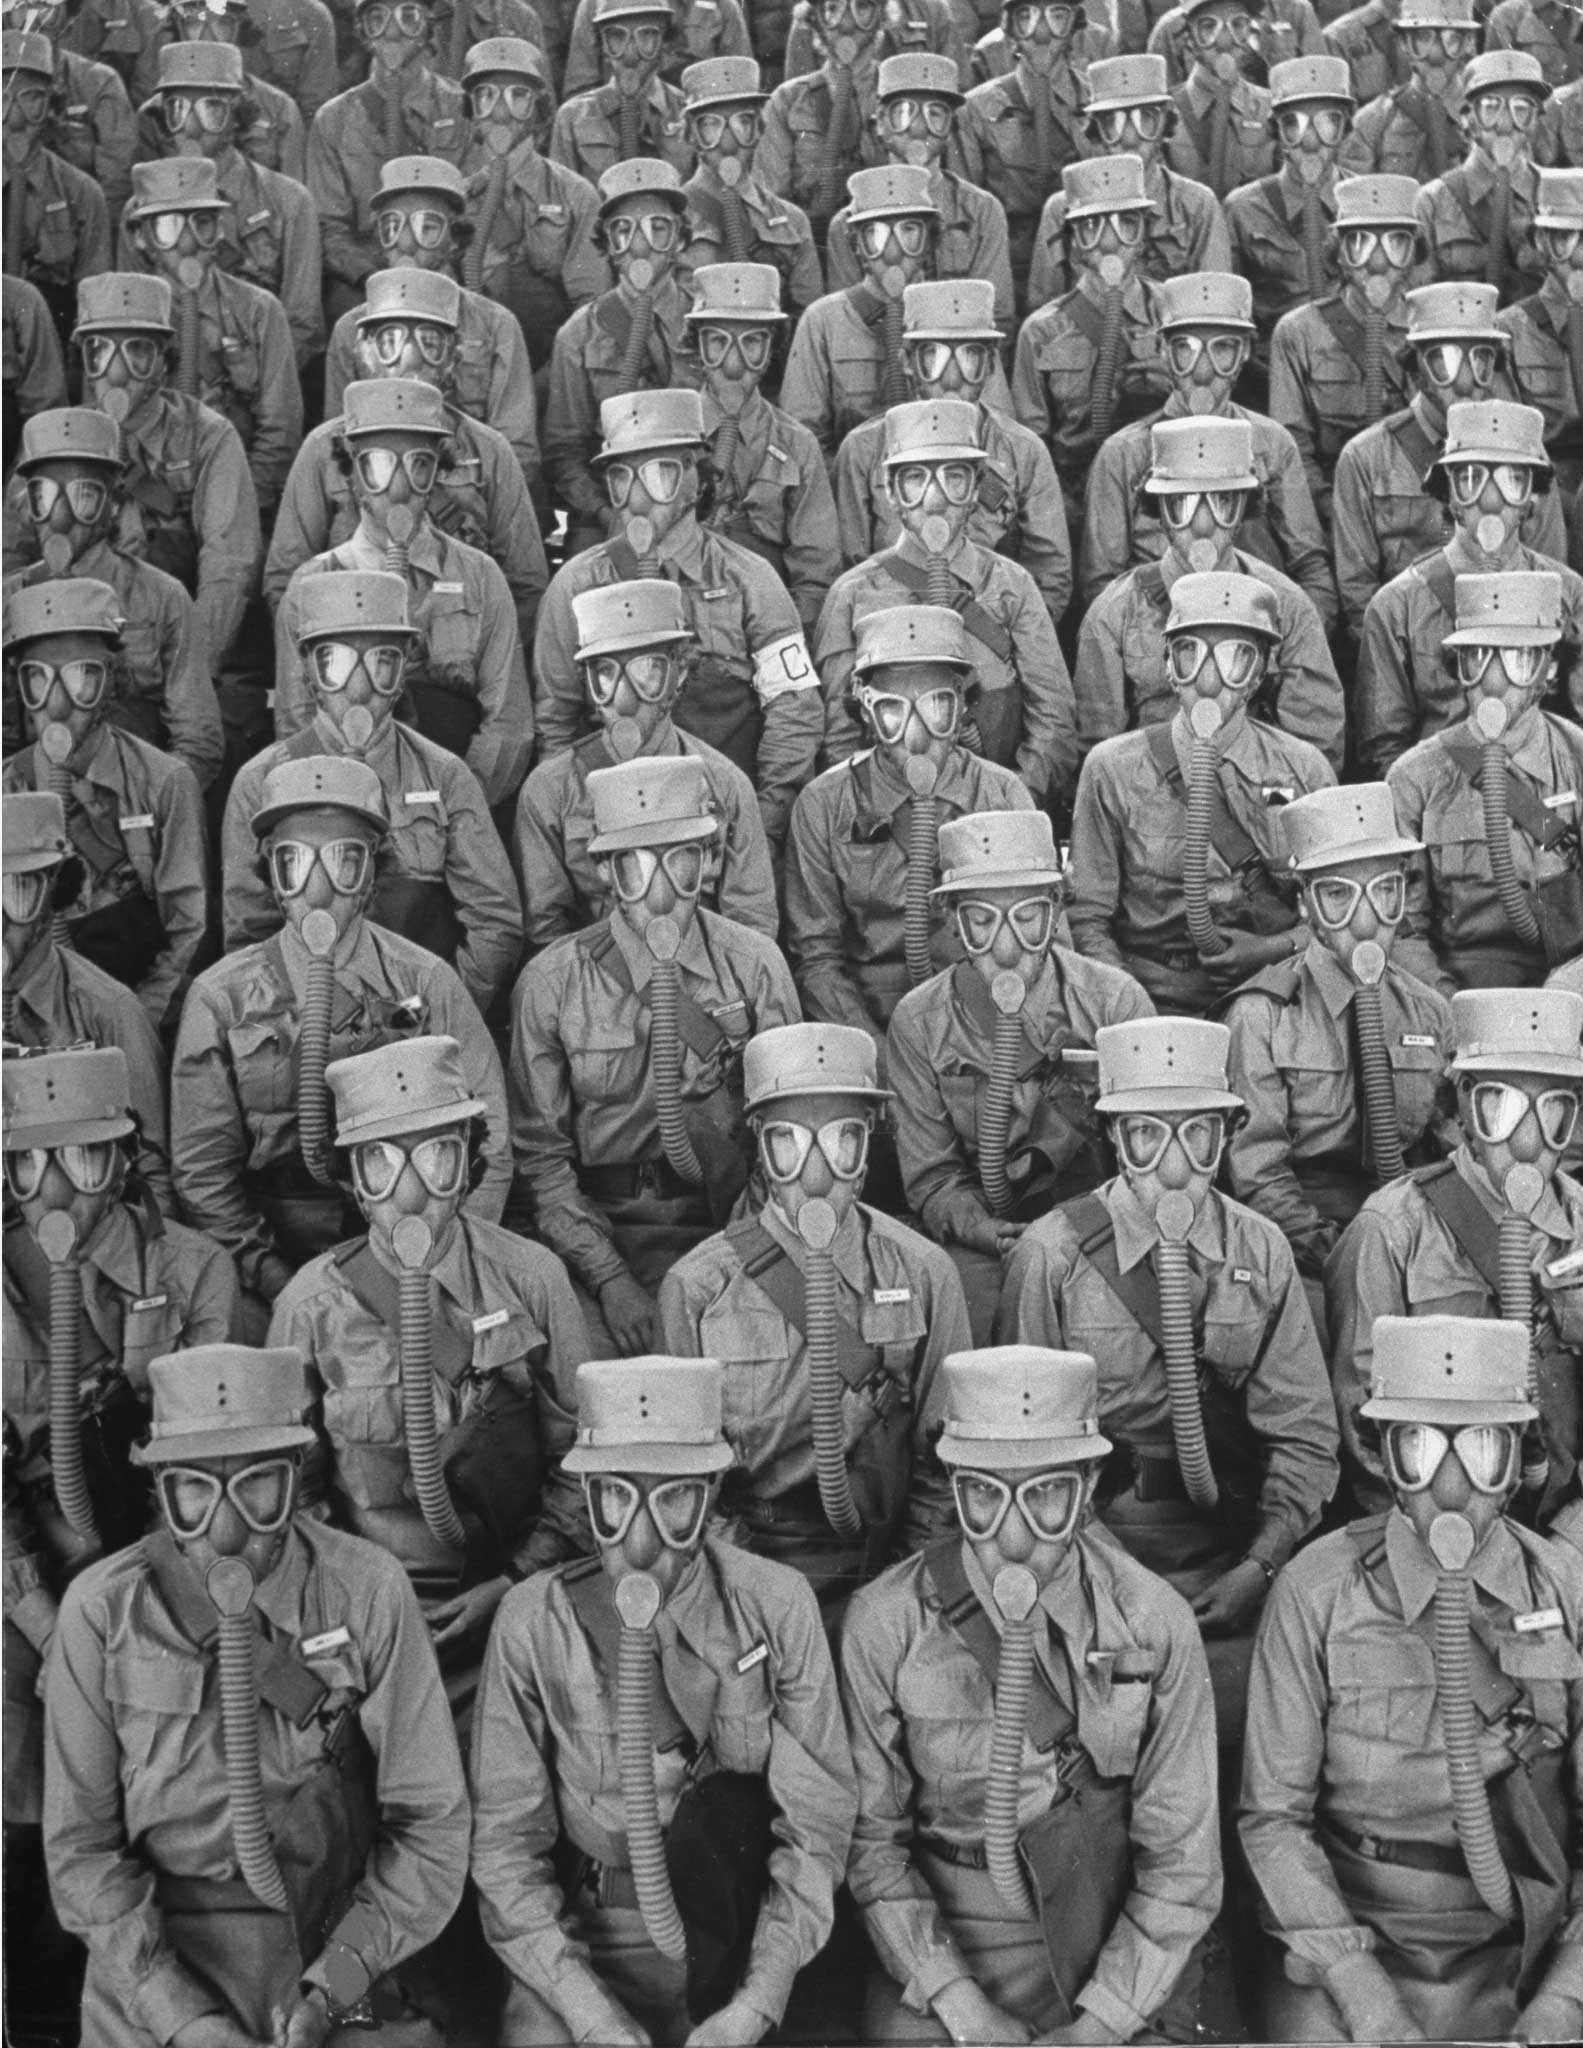 1942 | Row upon row of WACs (Women's Army Corps members) don gas masks for a training drill at Iowa's Fort Des Moines. Originally published in the September 7, 1942, issue of LIFE.